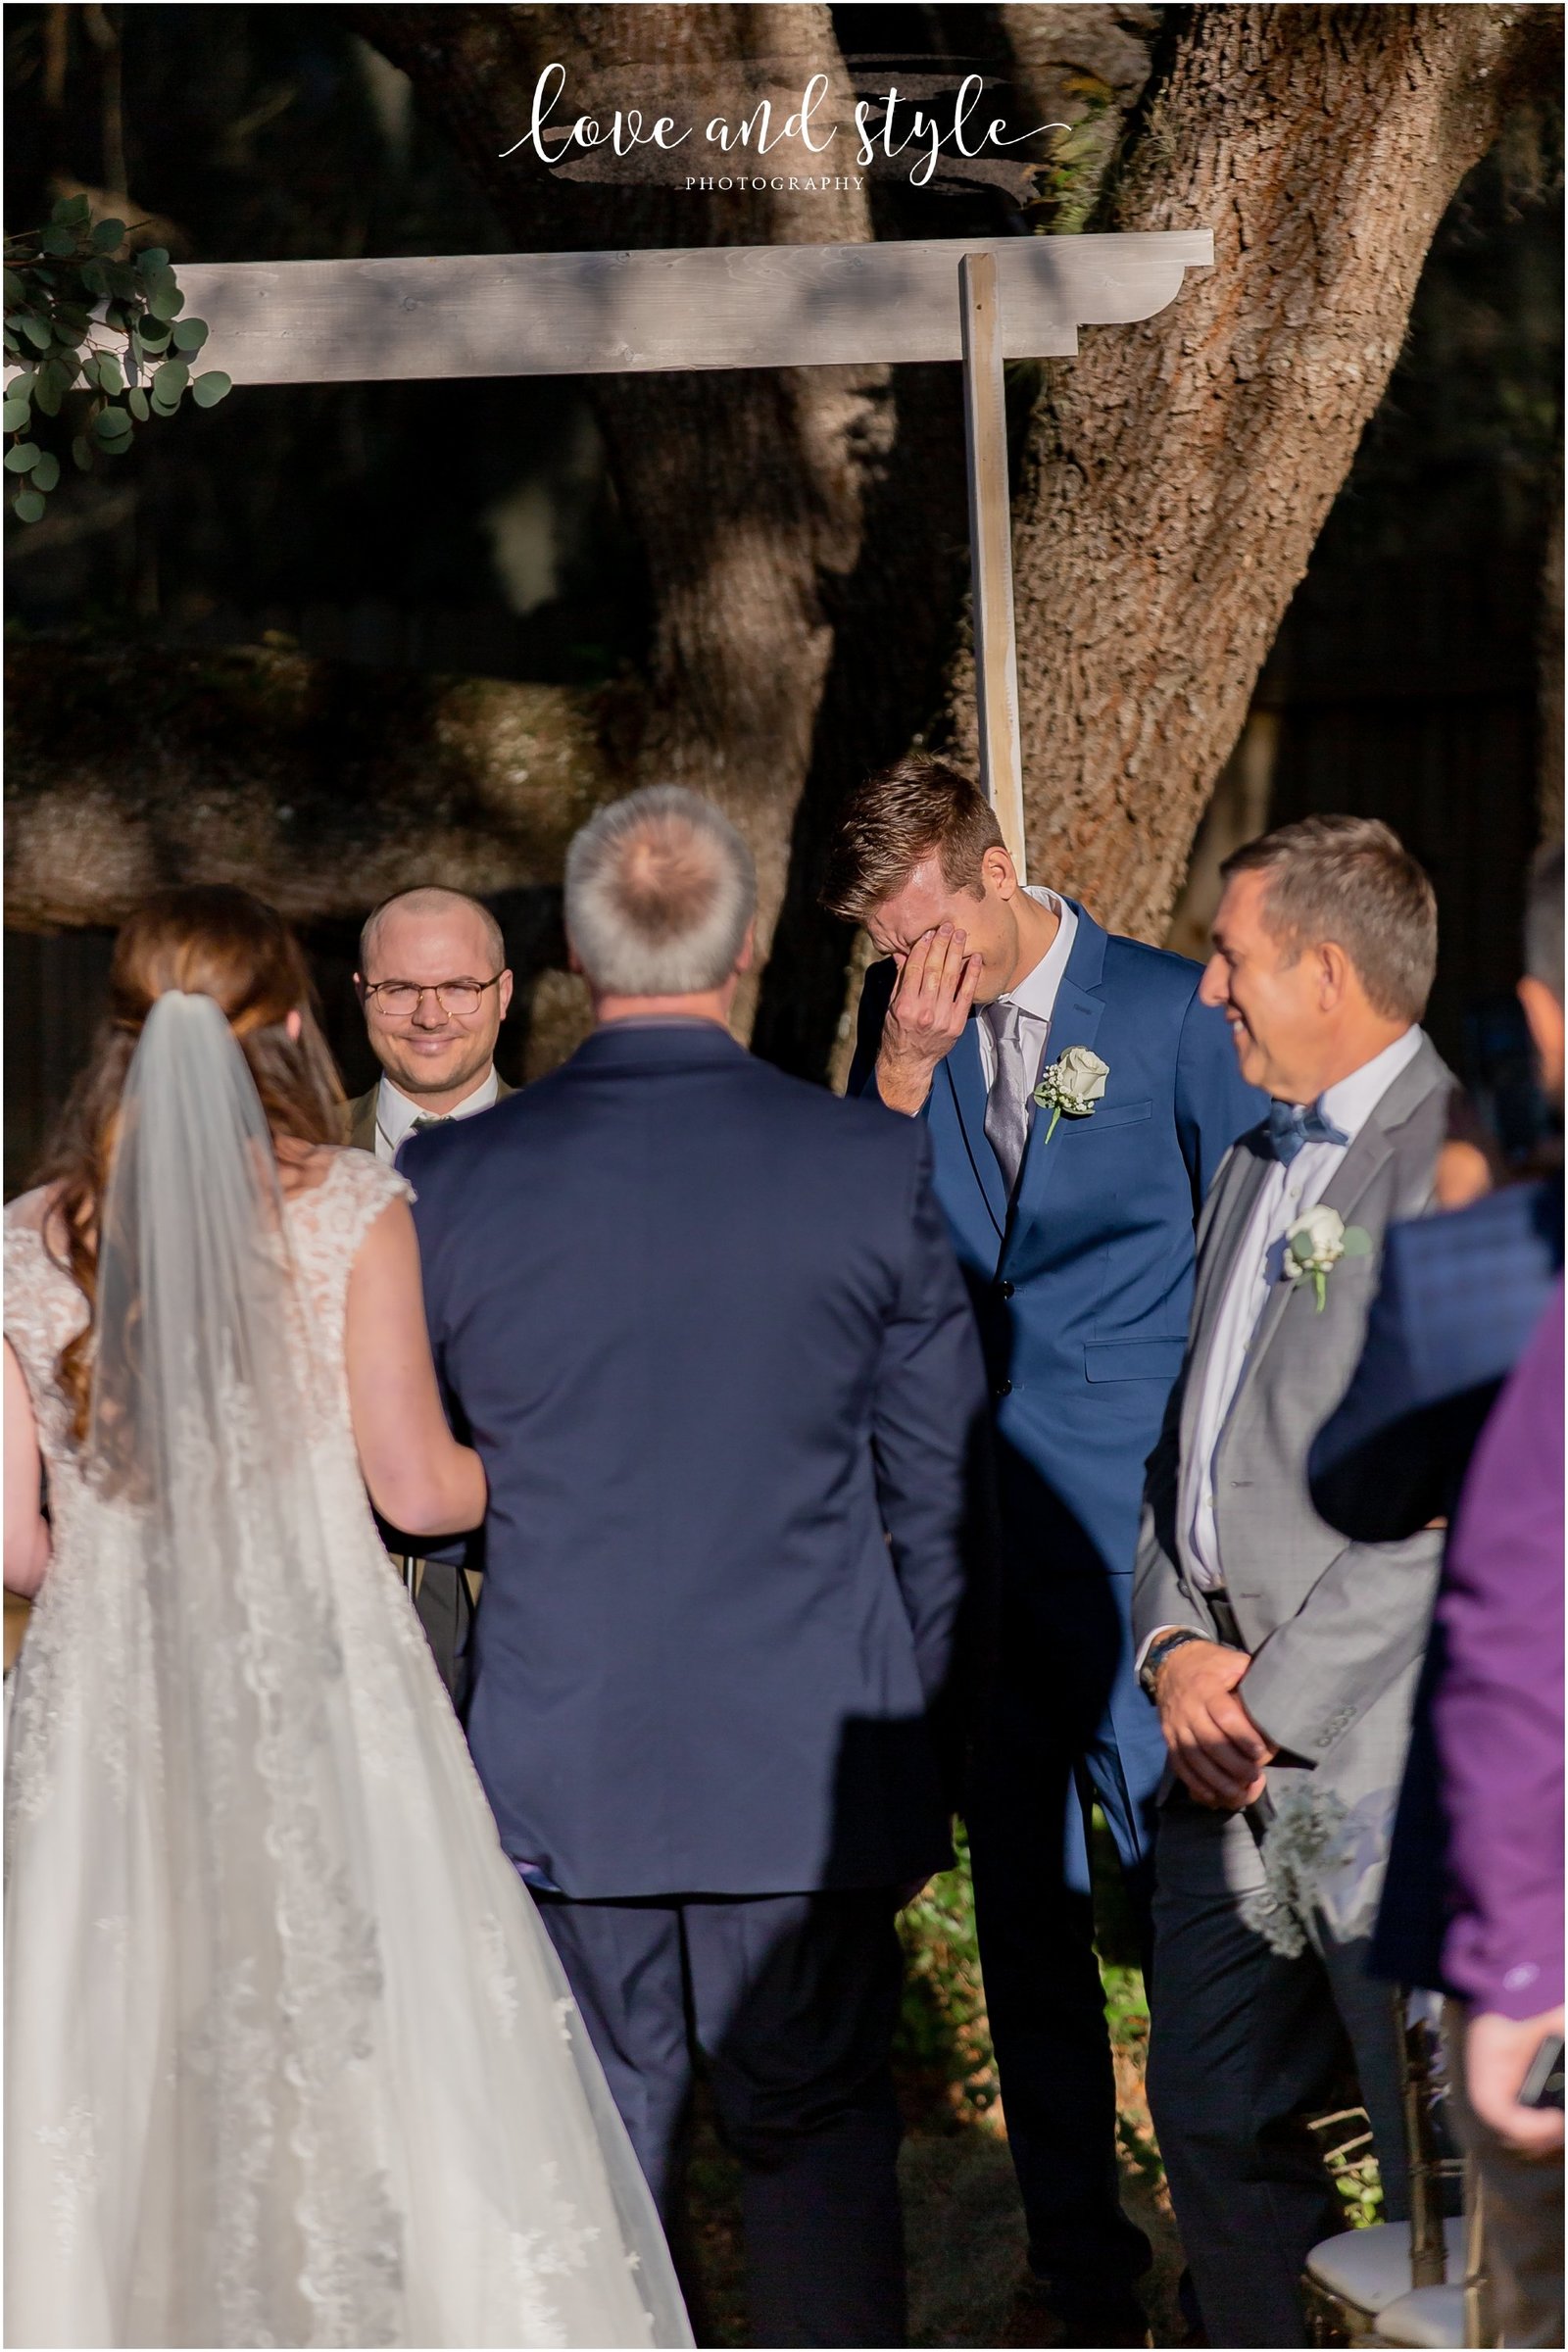 Groom sees his bride walking down the aisle at The Barn at Chapel Creek in Venice, Florida